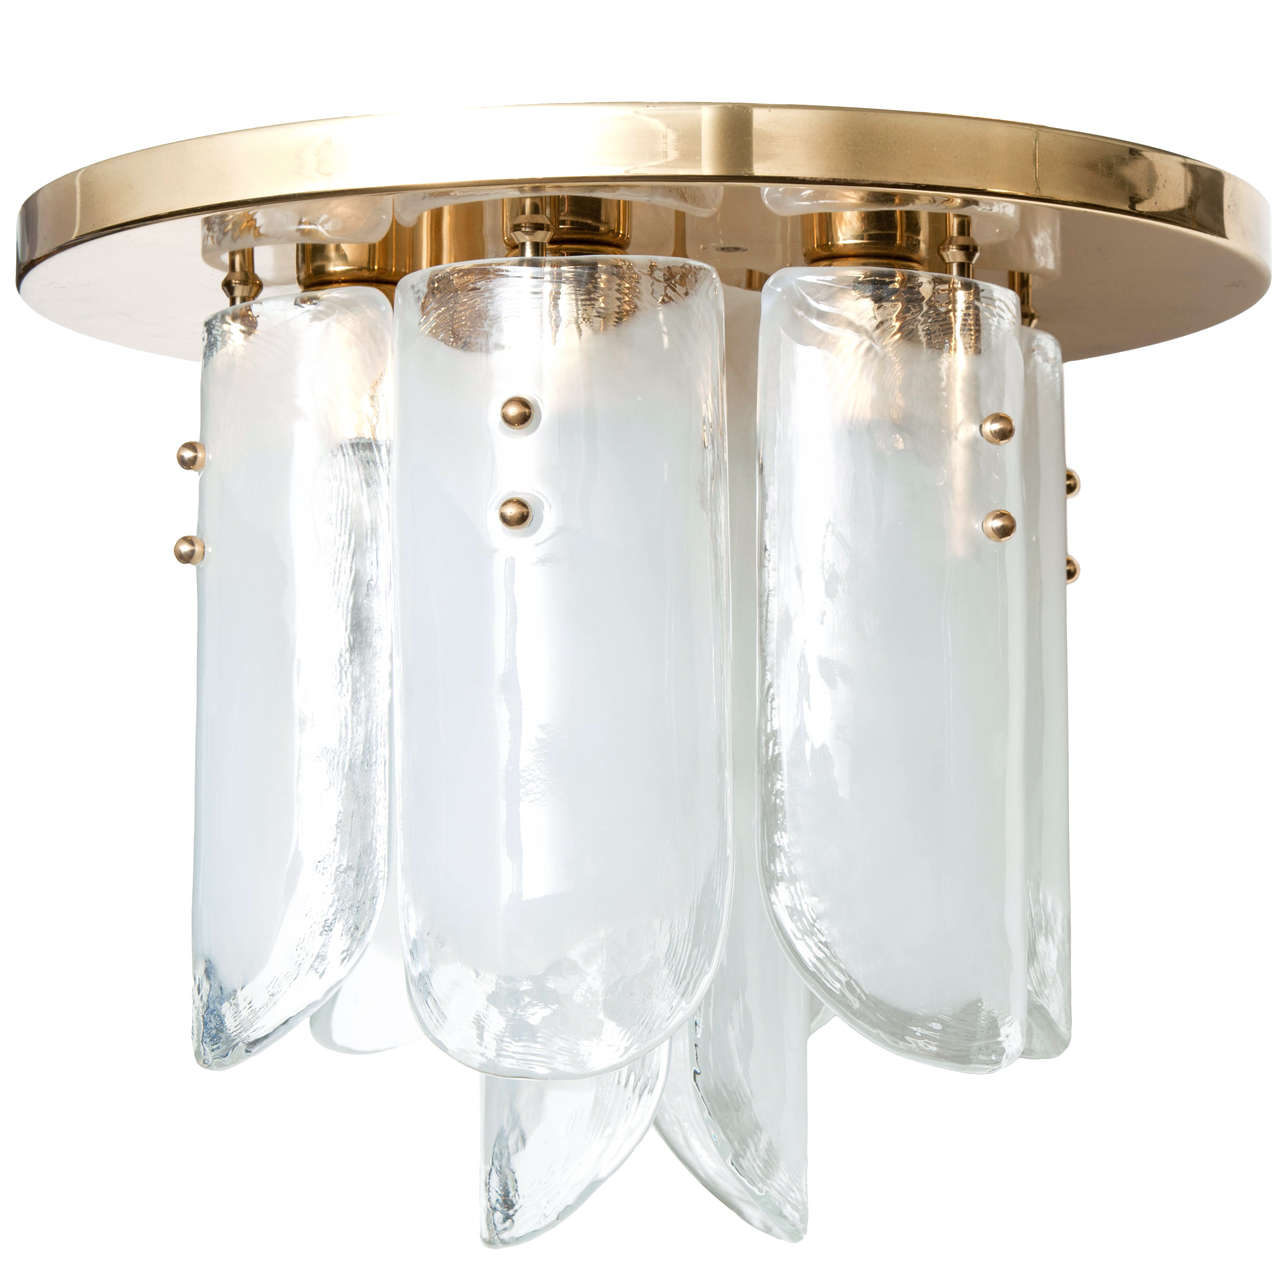 Kalmar Brass and Glass Flush Mount, pair available